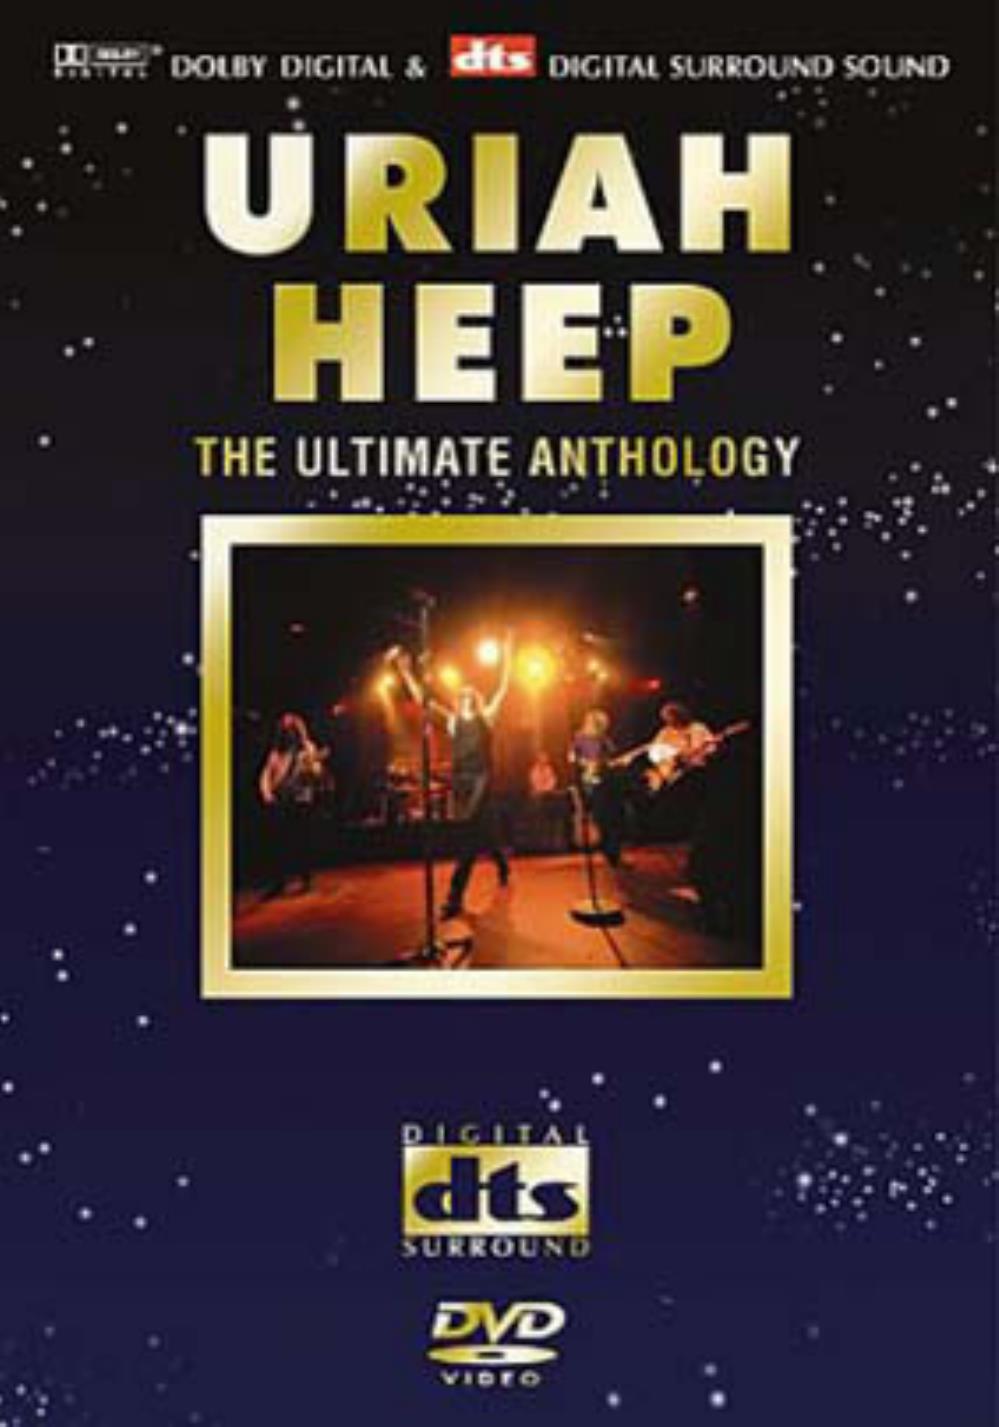 Uriah Heep The Ultimate Anthology album cover